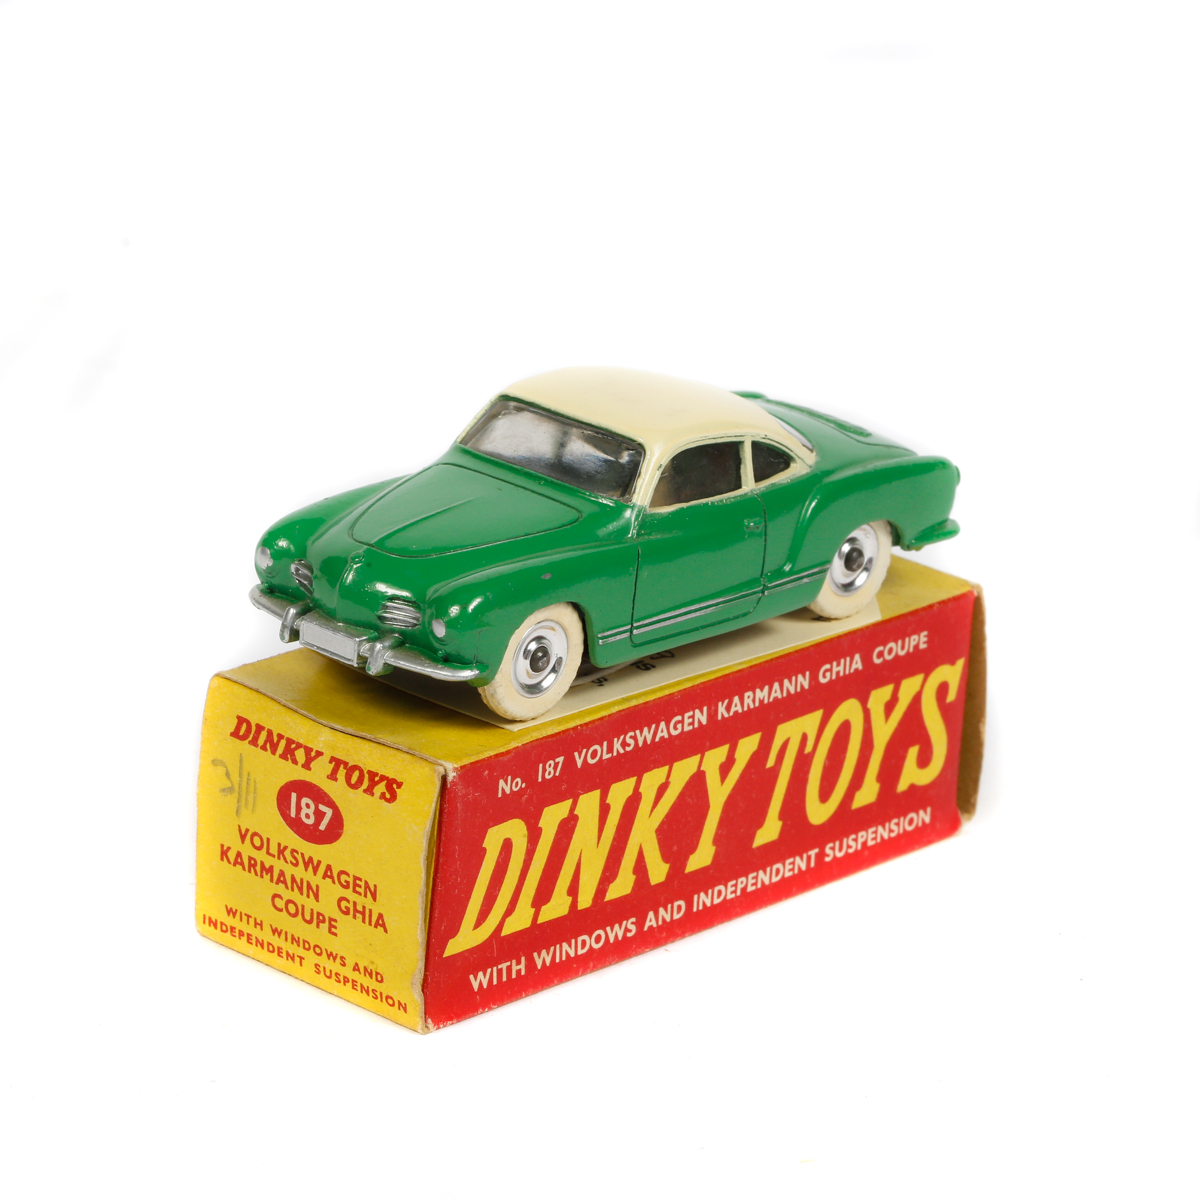 Dinky Toys Volkswagen Karmann Ghia (187). An example in green and cream, with spun wheels and